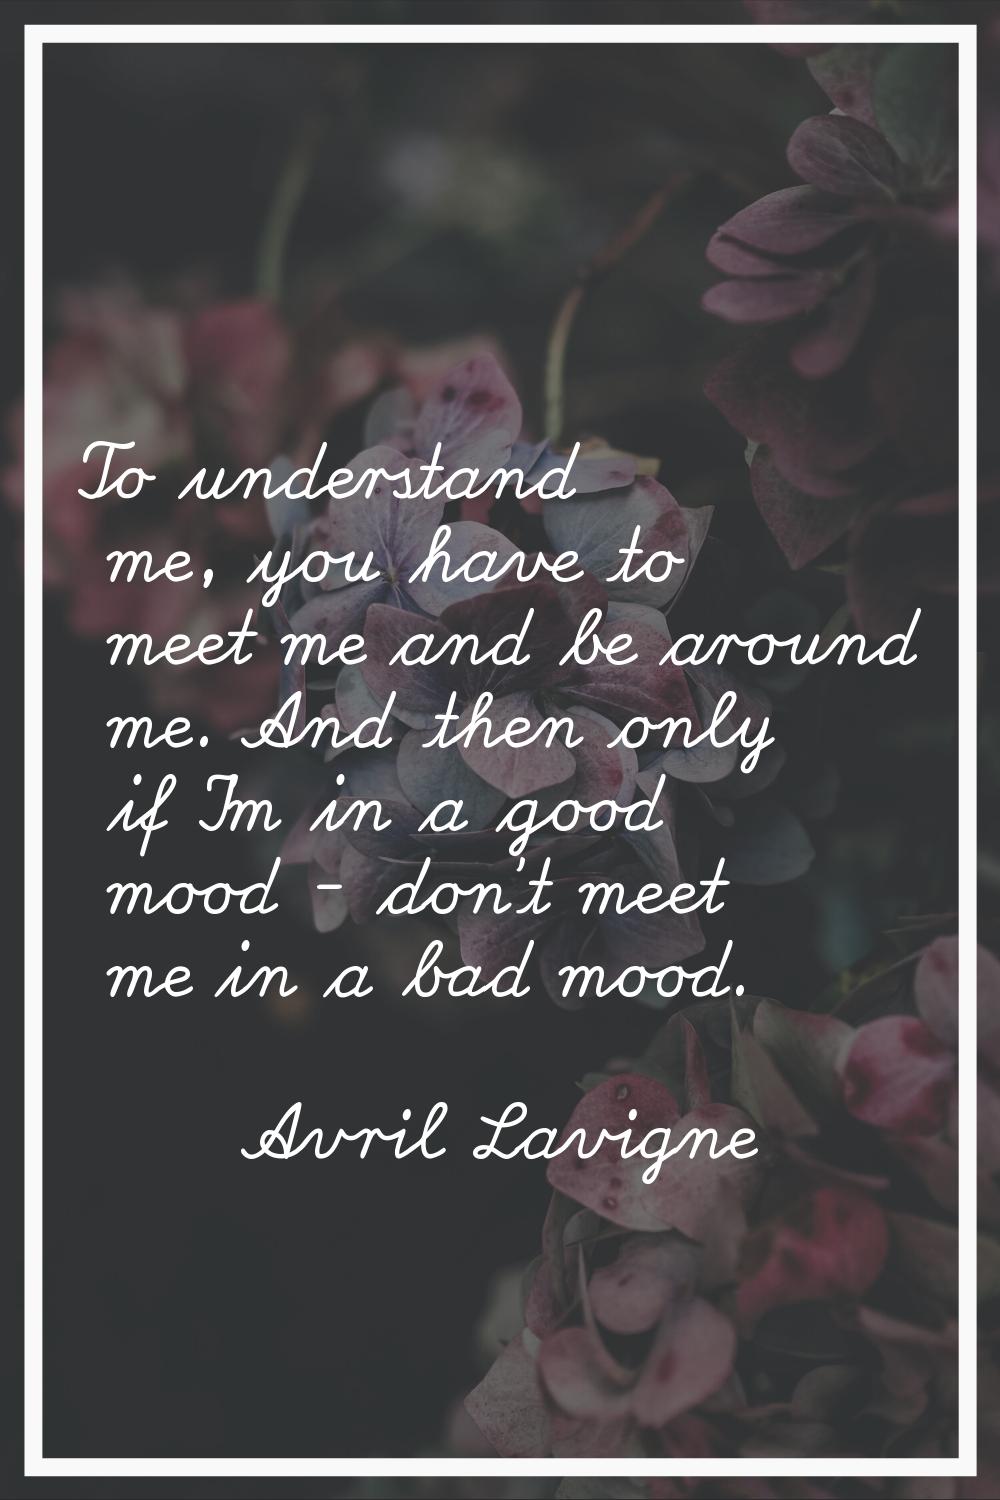 To understand me, you have to meet me and be around me. And then only if I'm in a good mood - don't